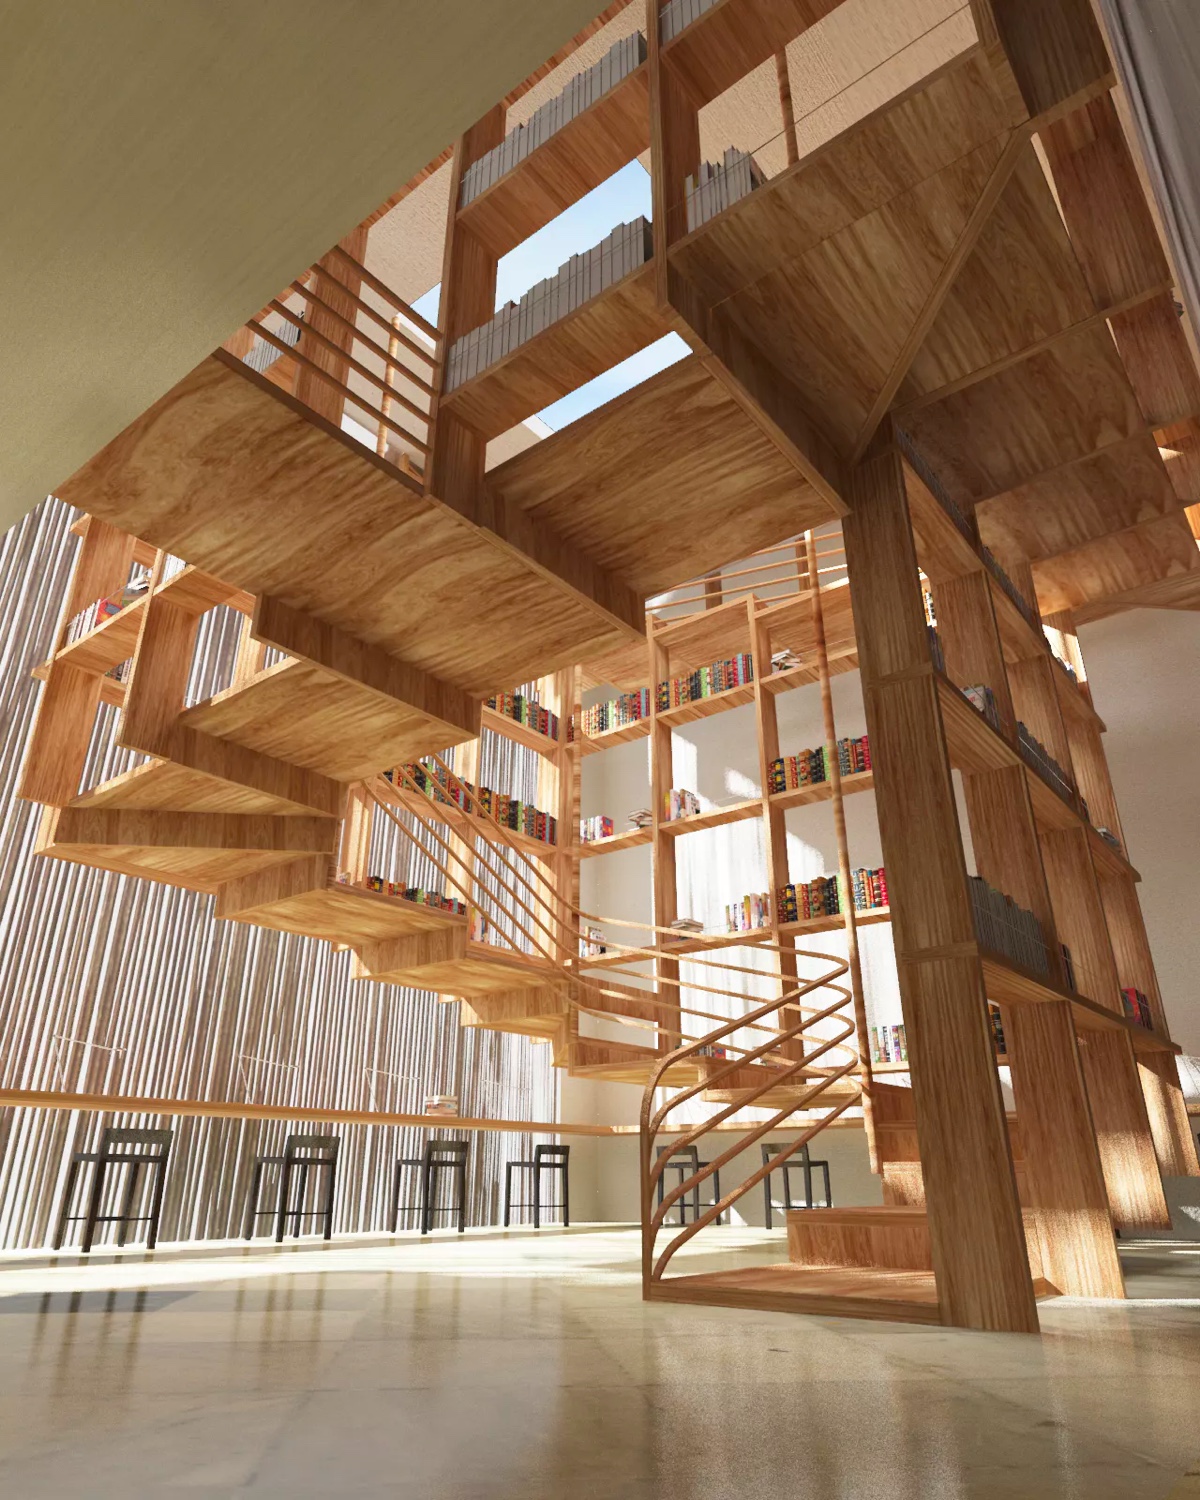 Wanna go even bigger? How about this giant library stairwell.